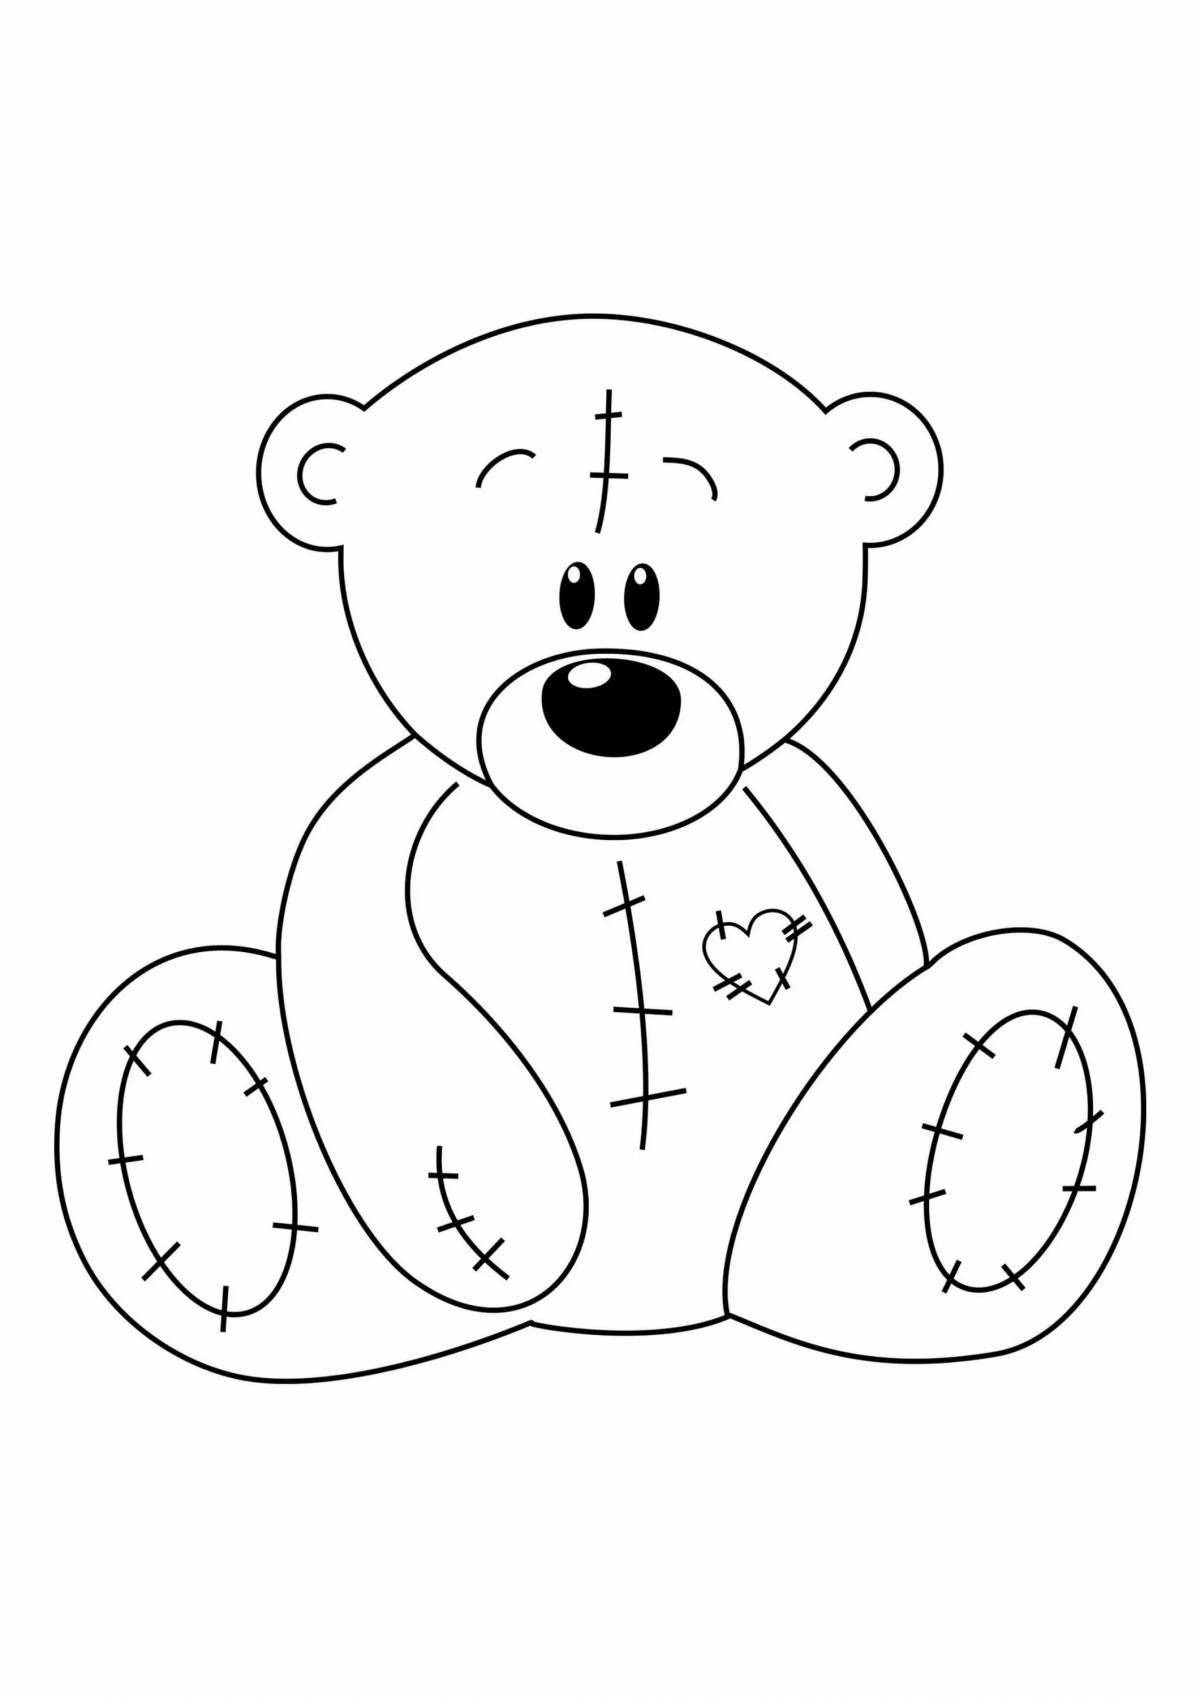 Wriggling Teddy Bear Coloring Page